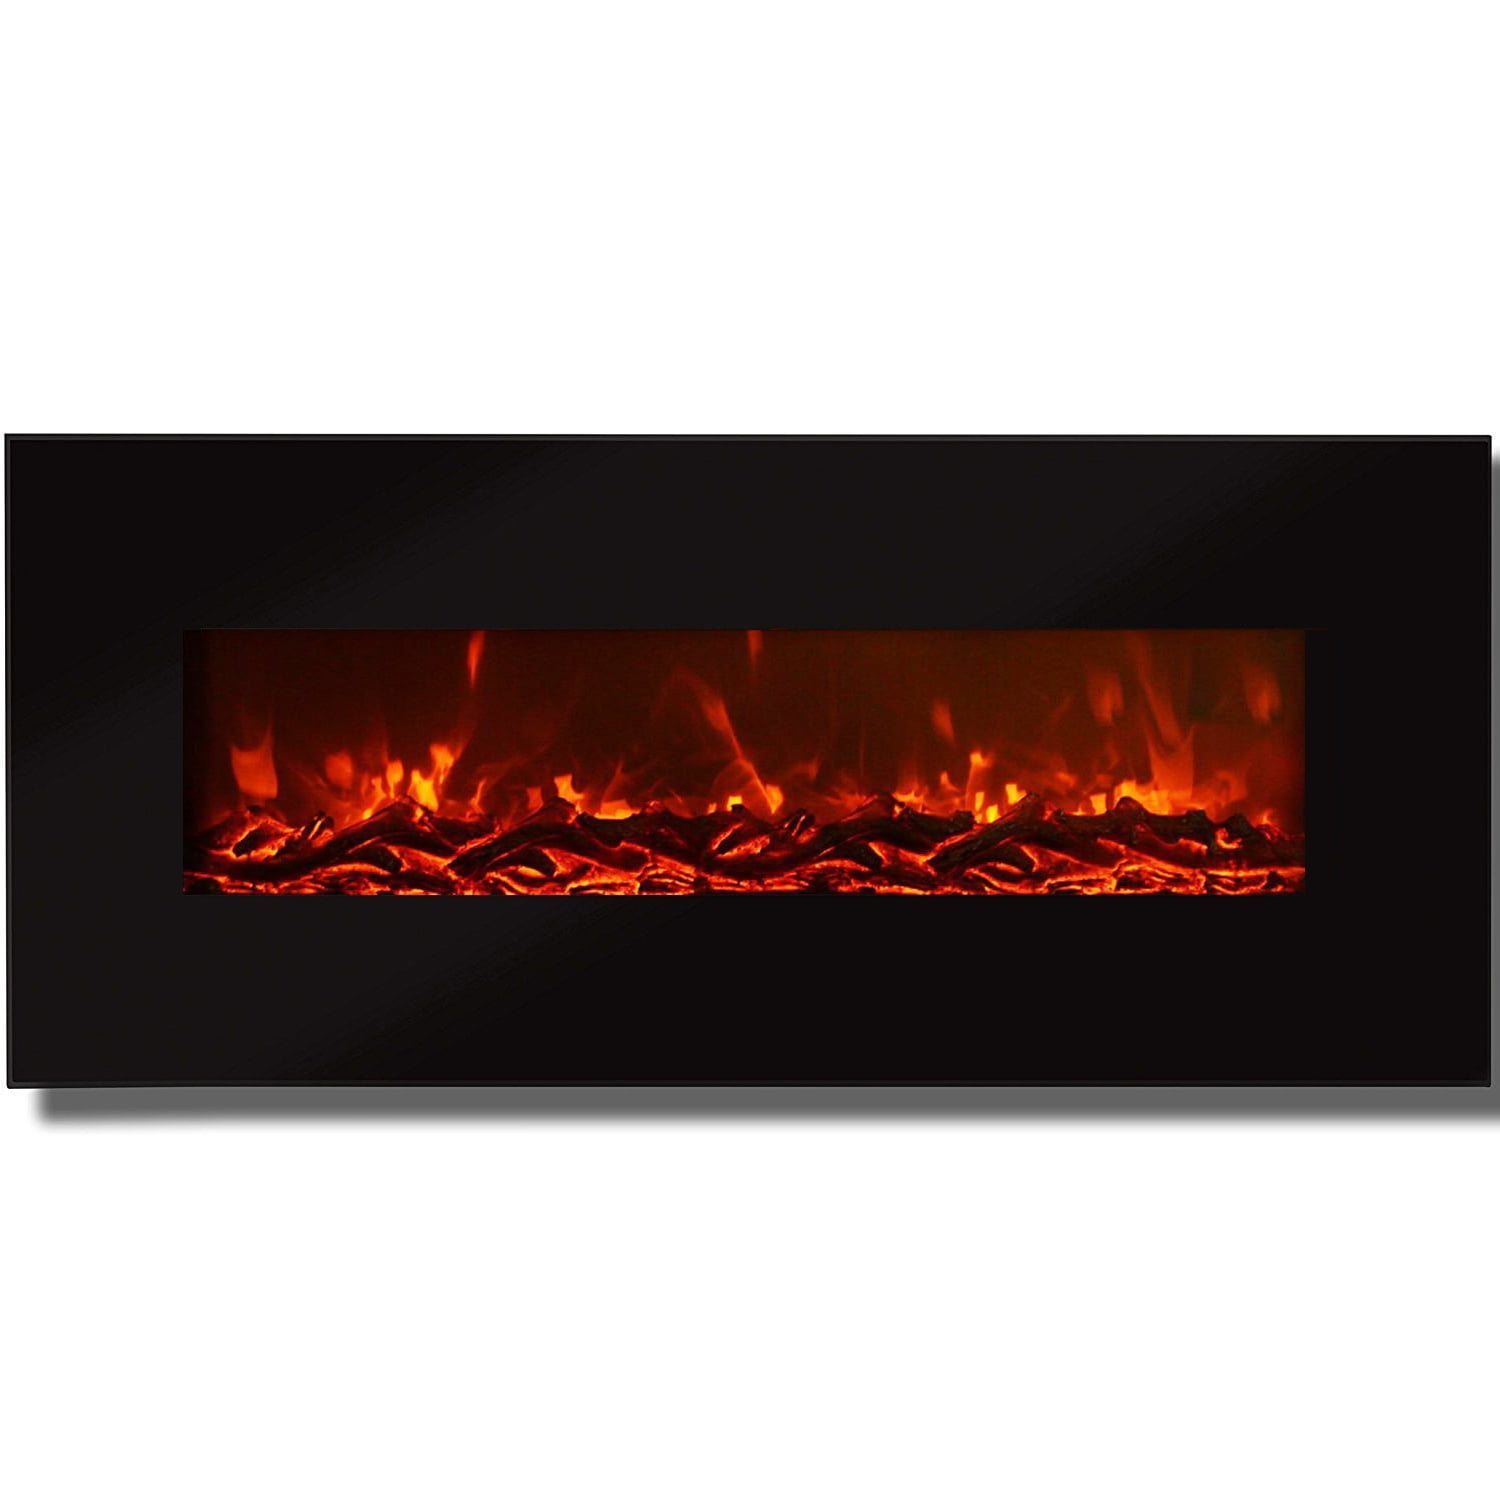 Regal Flame Valencia Black 50" Log Ventless Heater Electric Wall Mounted Fireplace Better than Wood Fireplaces, Gas Logs, Firepl